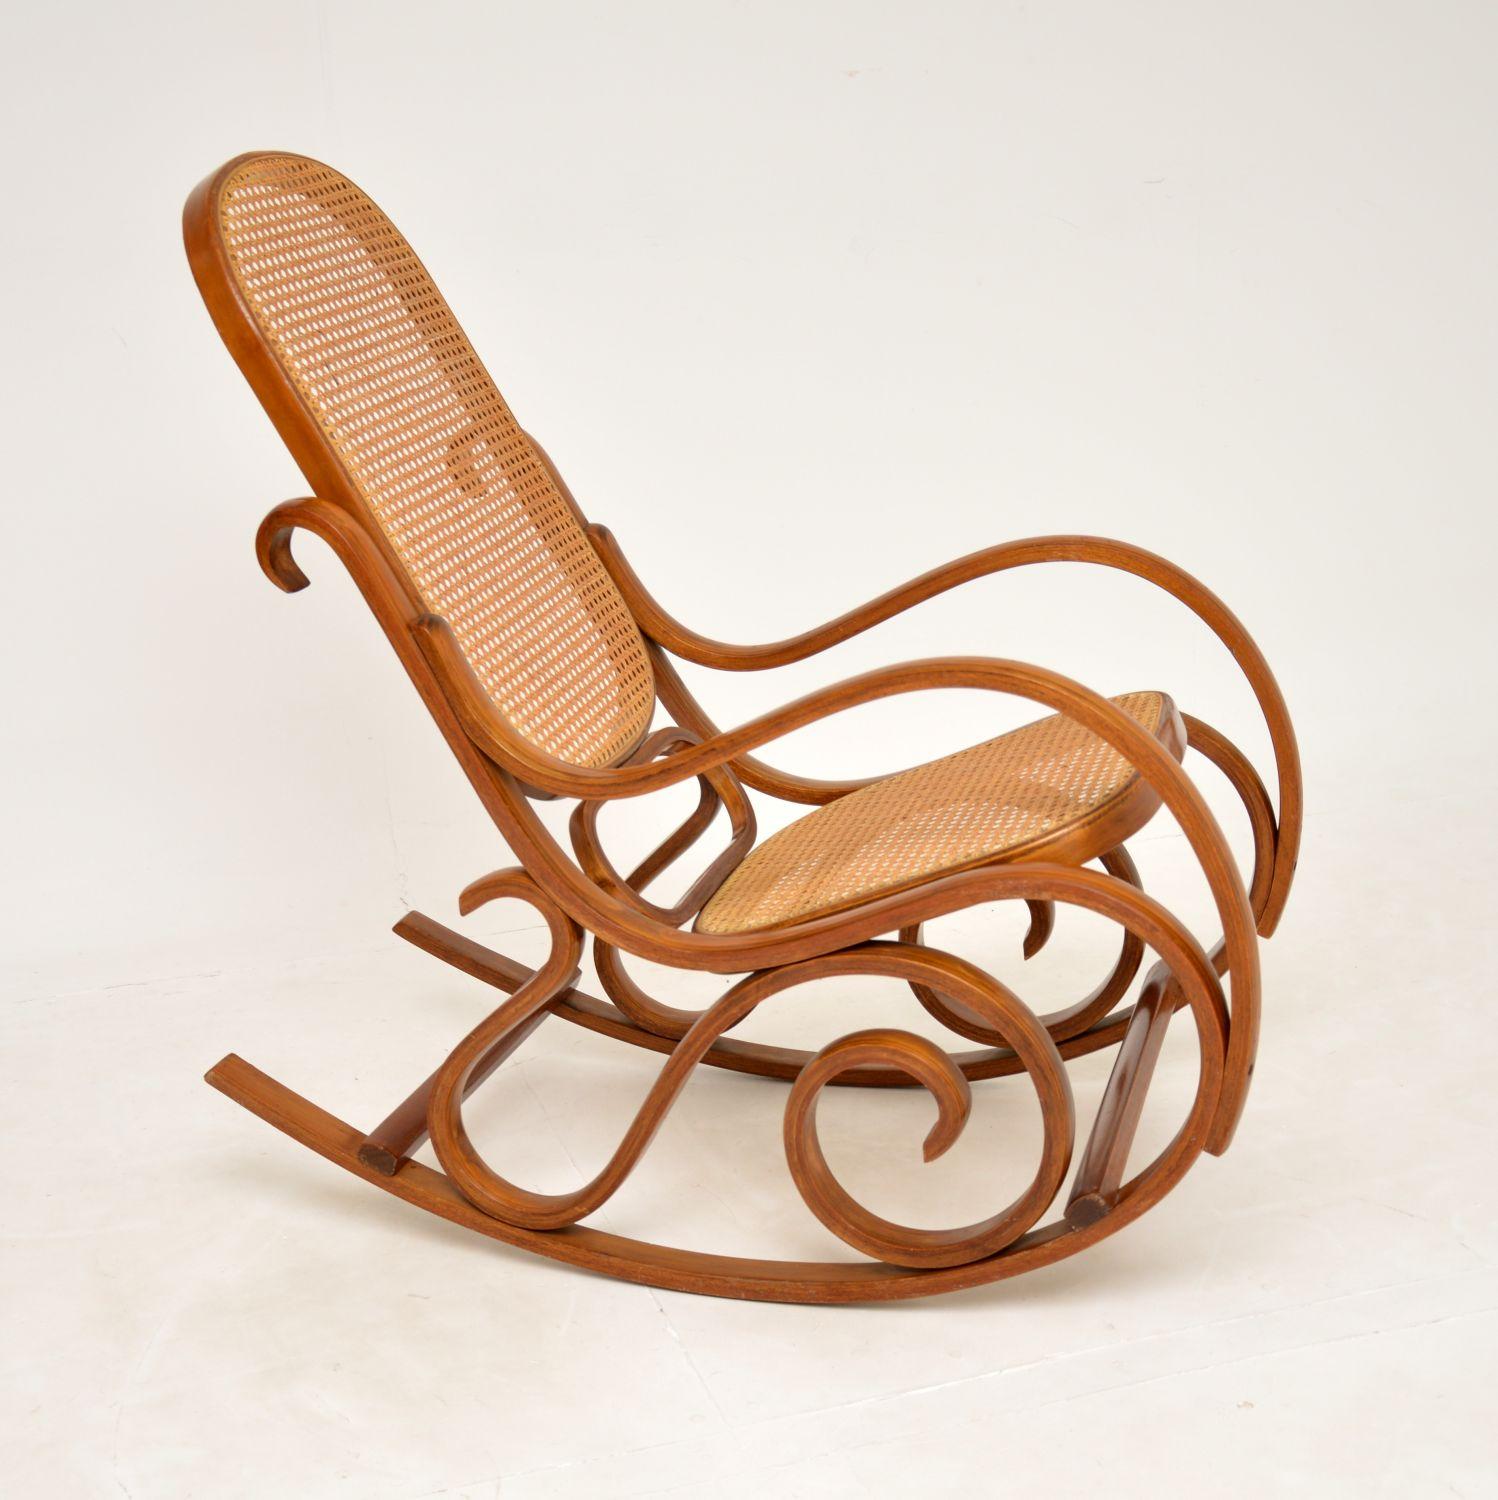 A stunning and iconic design, this is the number 21 bentwood rocking chair by Thonet. This model was likely made in Czechoslovakia in one of the former Thonet factories which used the Thonet machinery in the mid twentieth century. It dates from